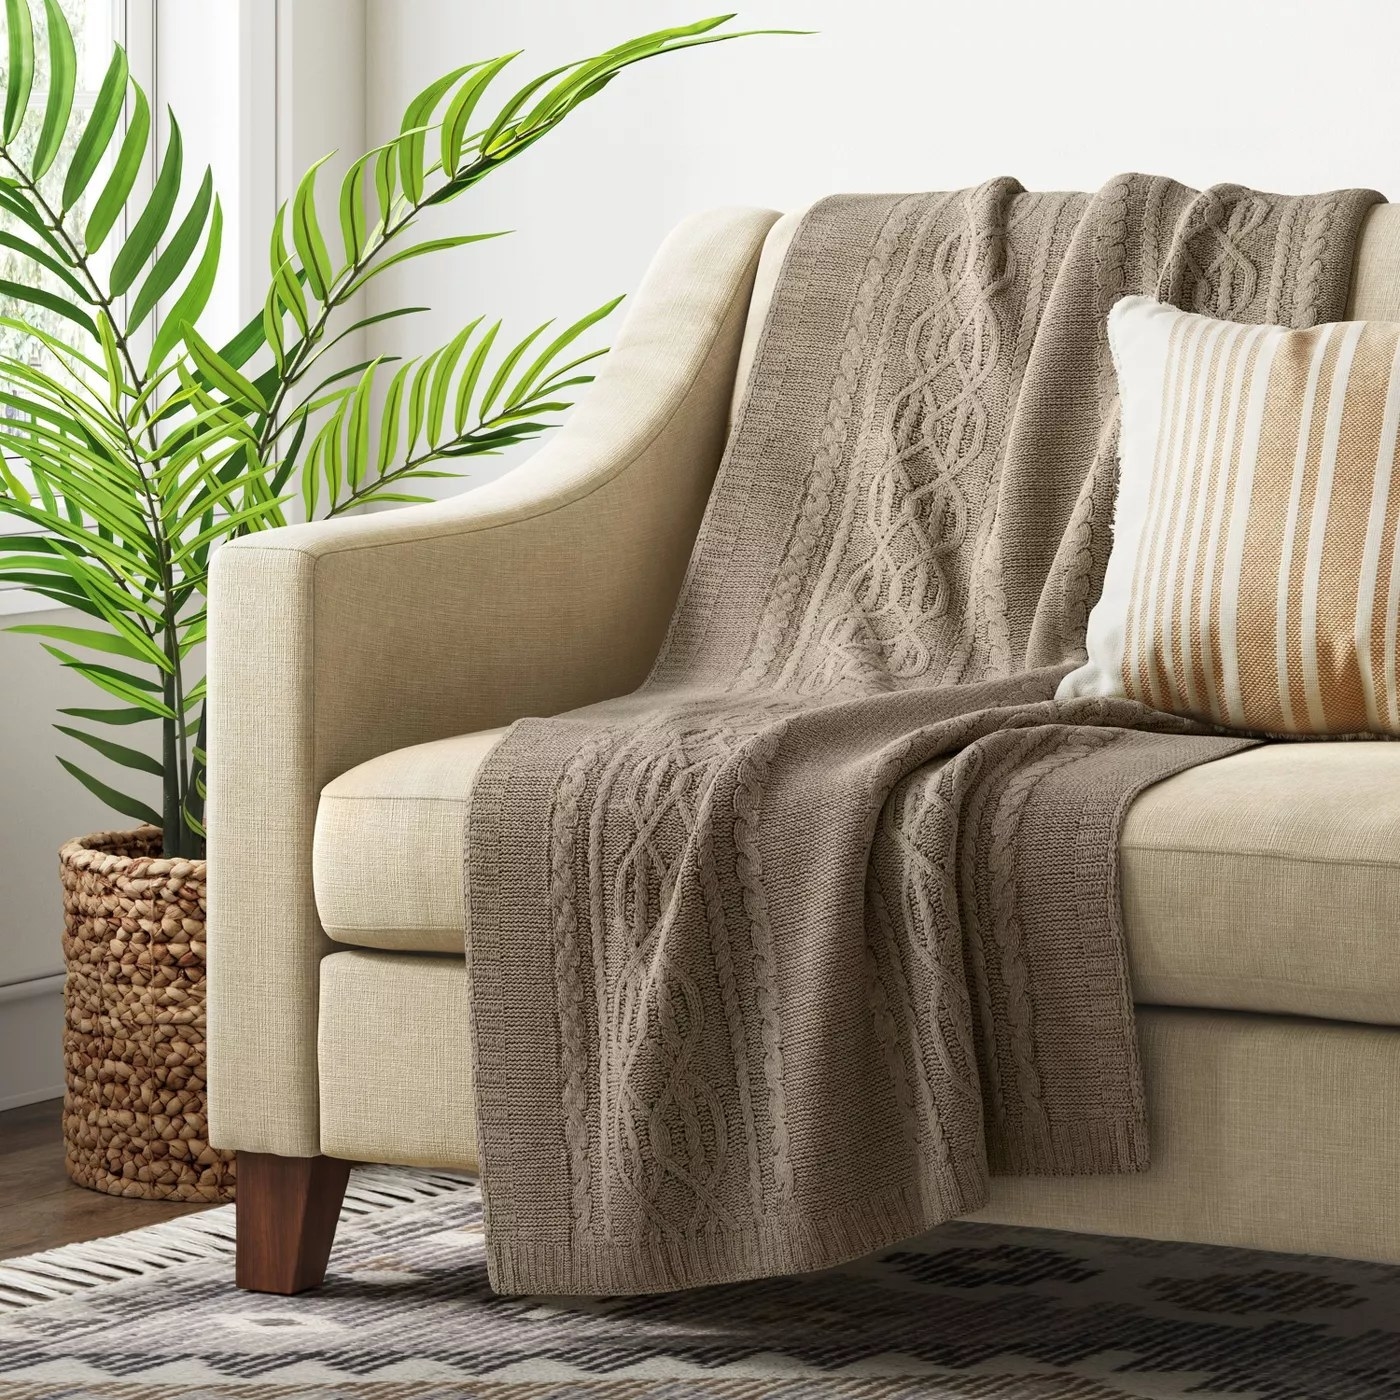 A tan blanket draped over a living room couch